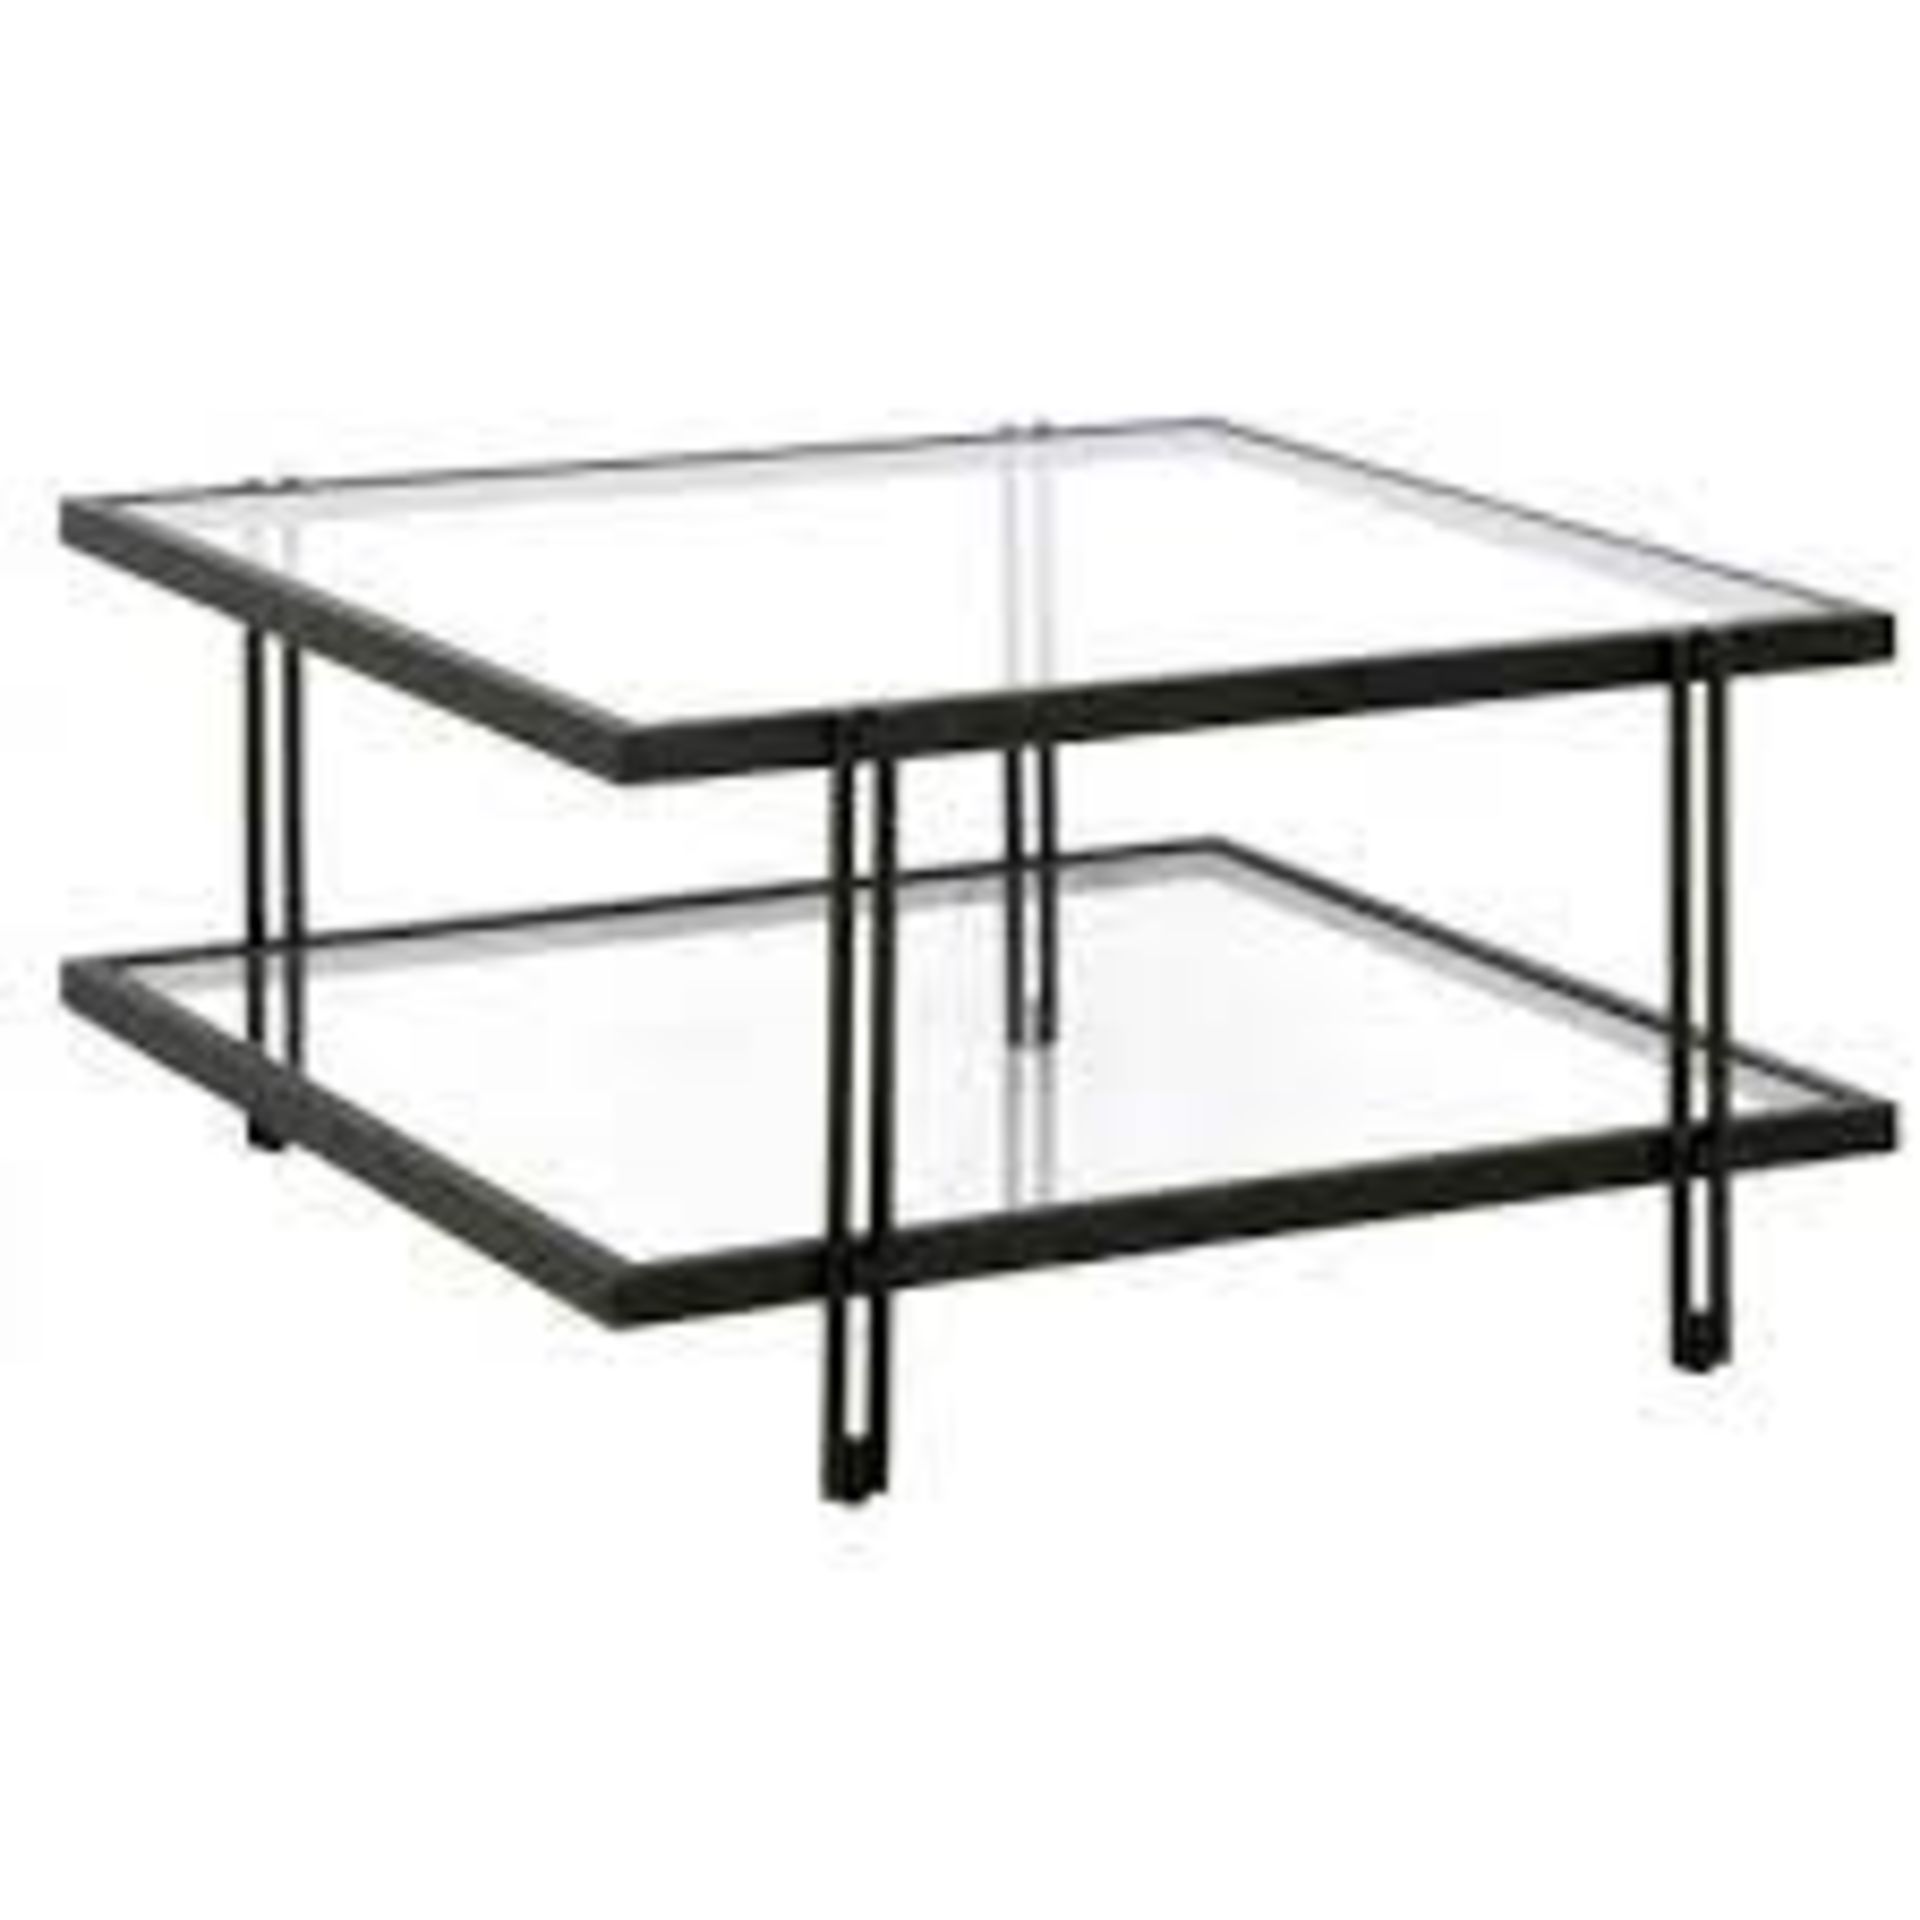 Ebern Designs Dein Coffee Table with Storage. RRP £210.00. - SR4. This simple yet stylish coffee